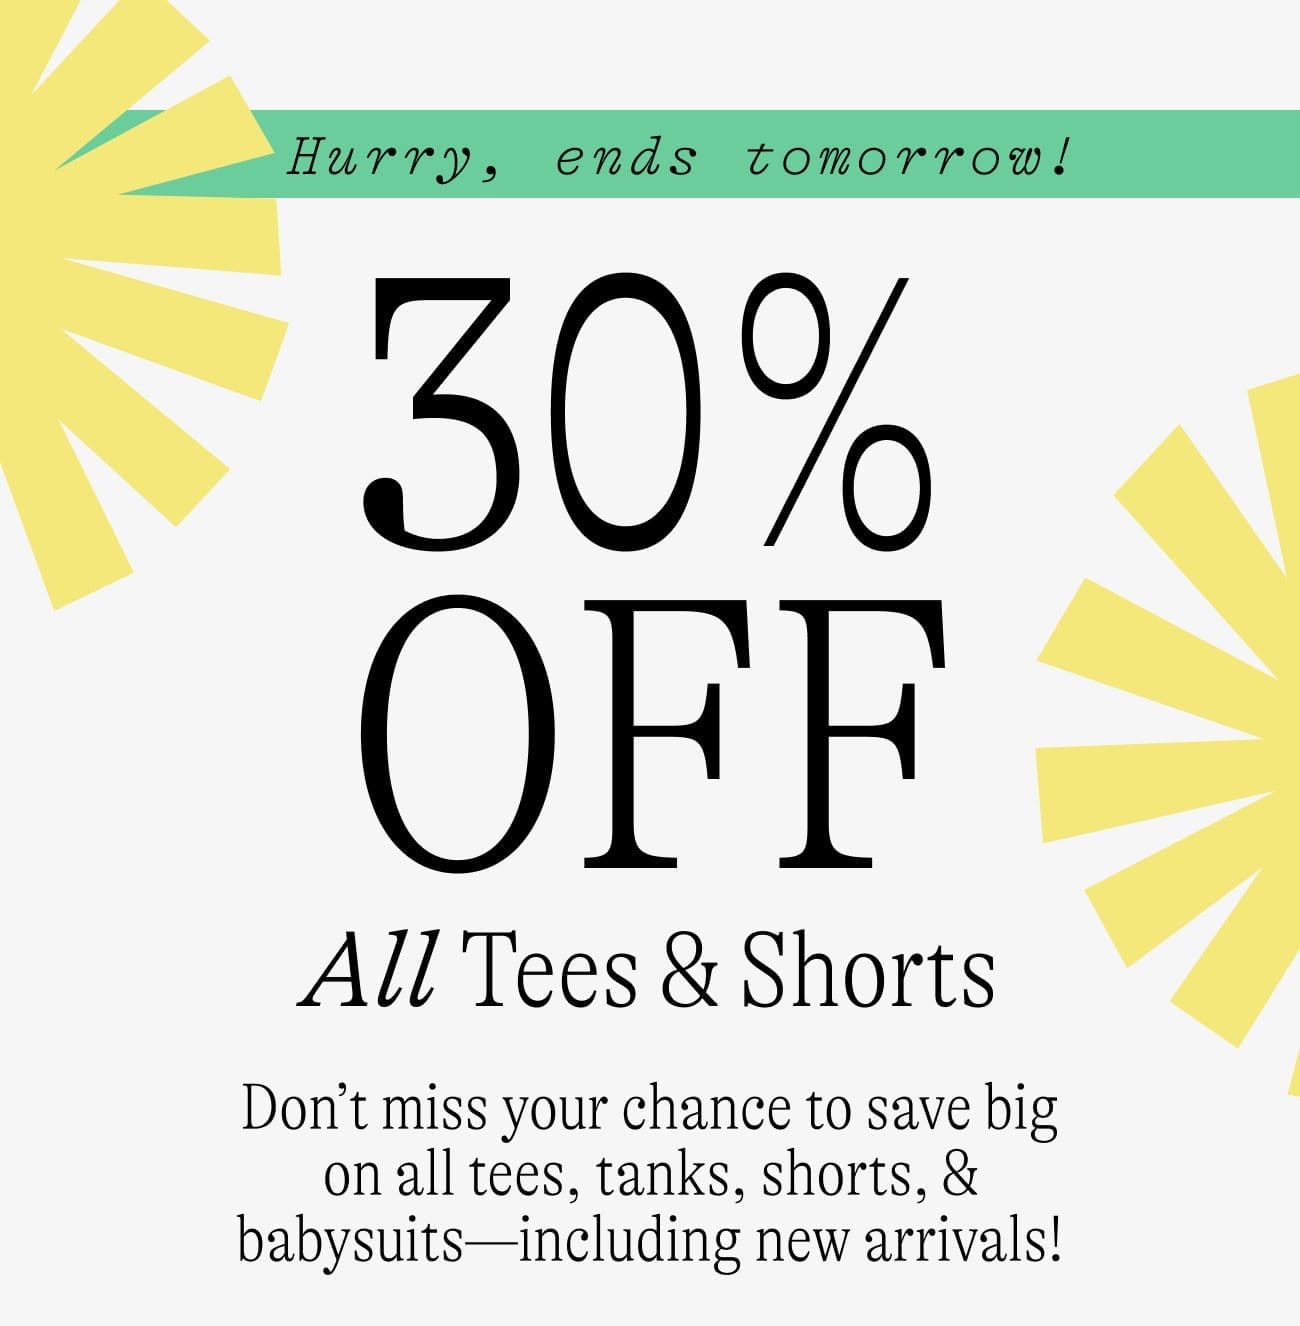 30% OFF All Tees & Shorts Save on all tees, tanks, shorts, & babysuits for a limited time!